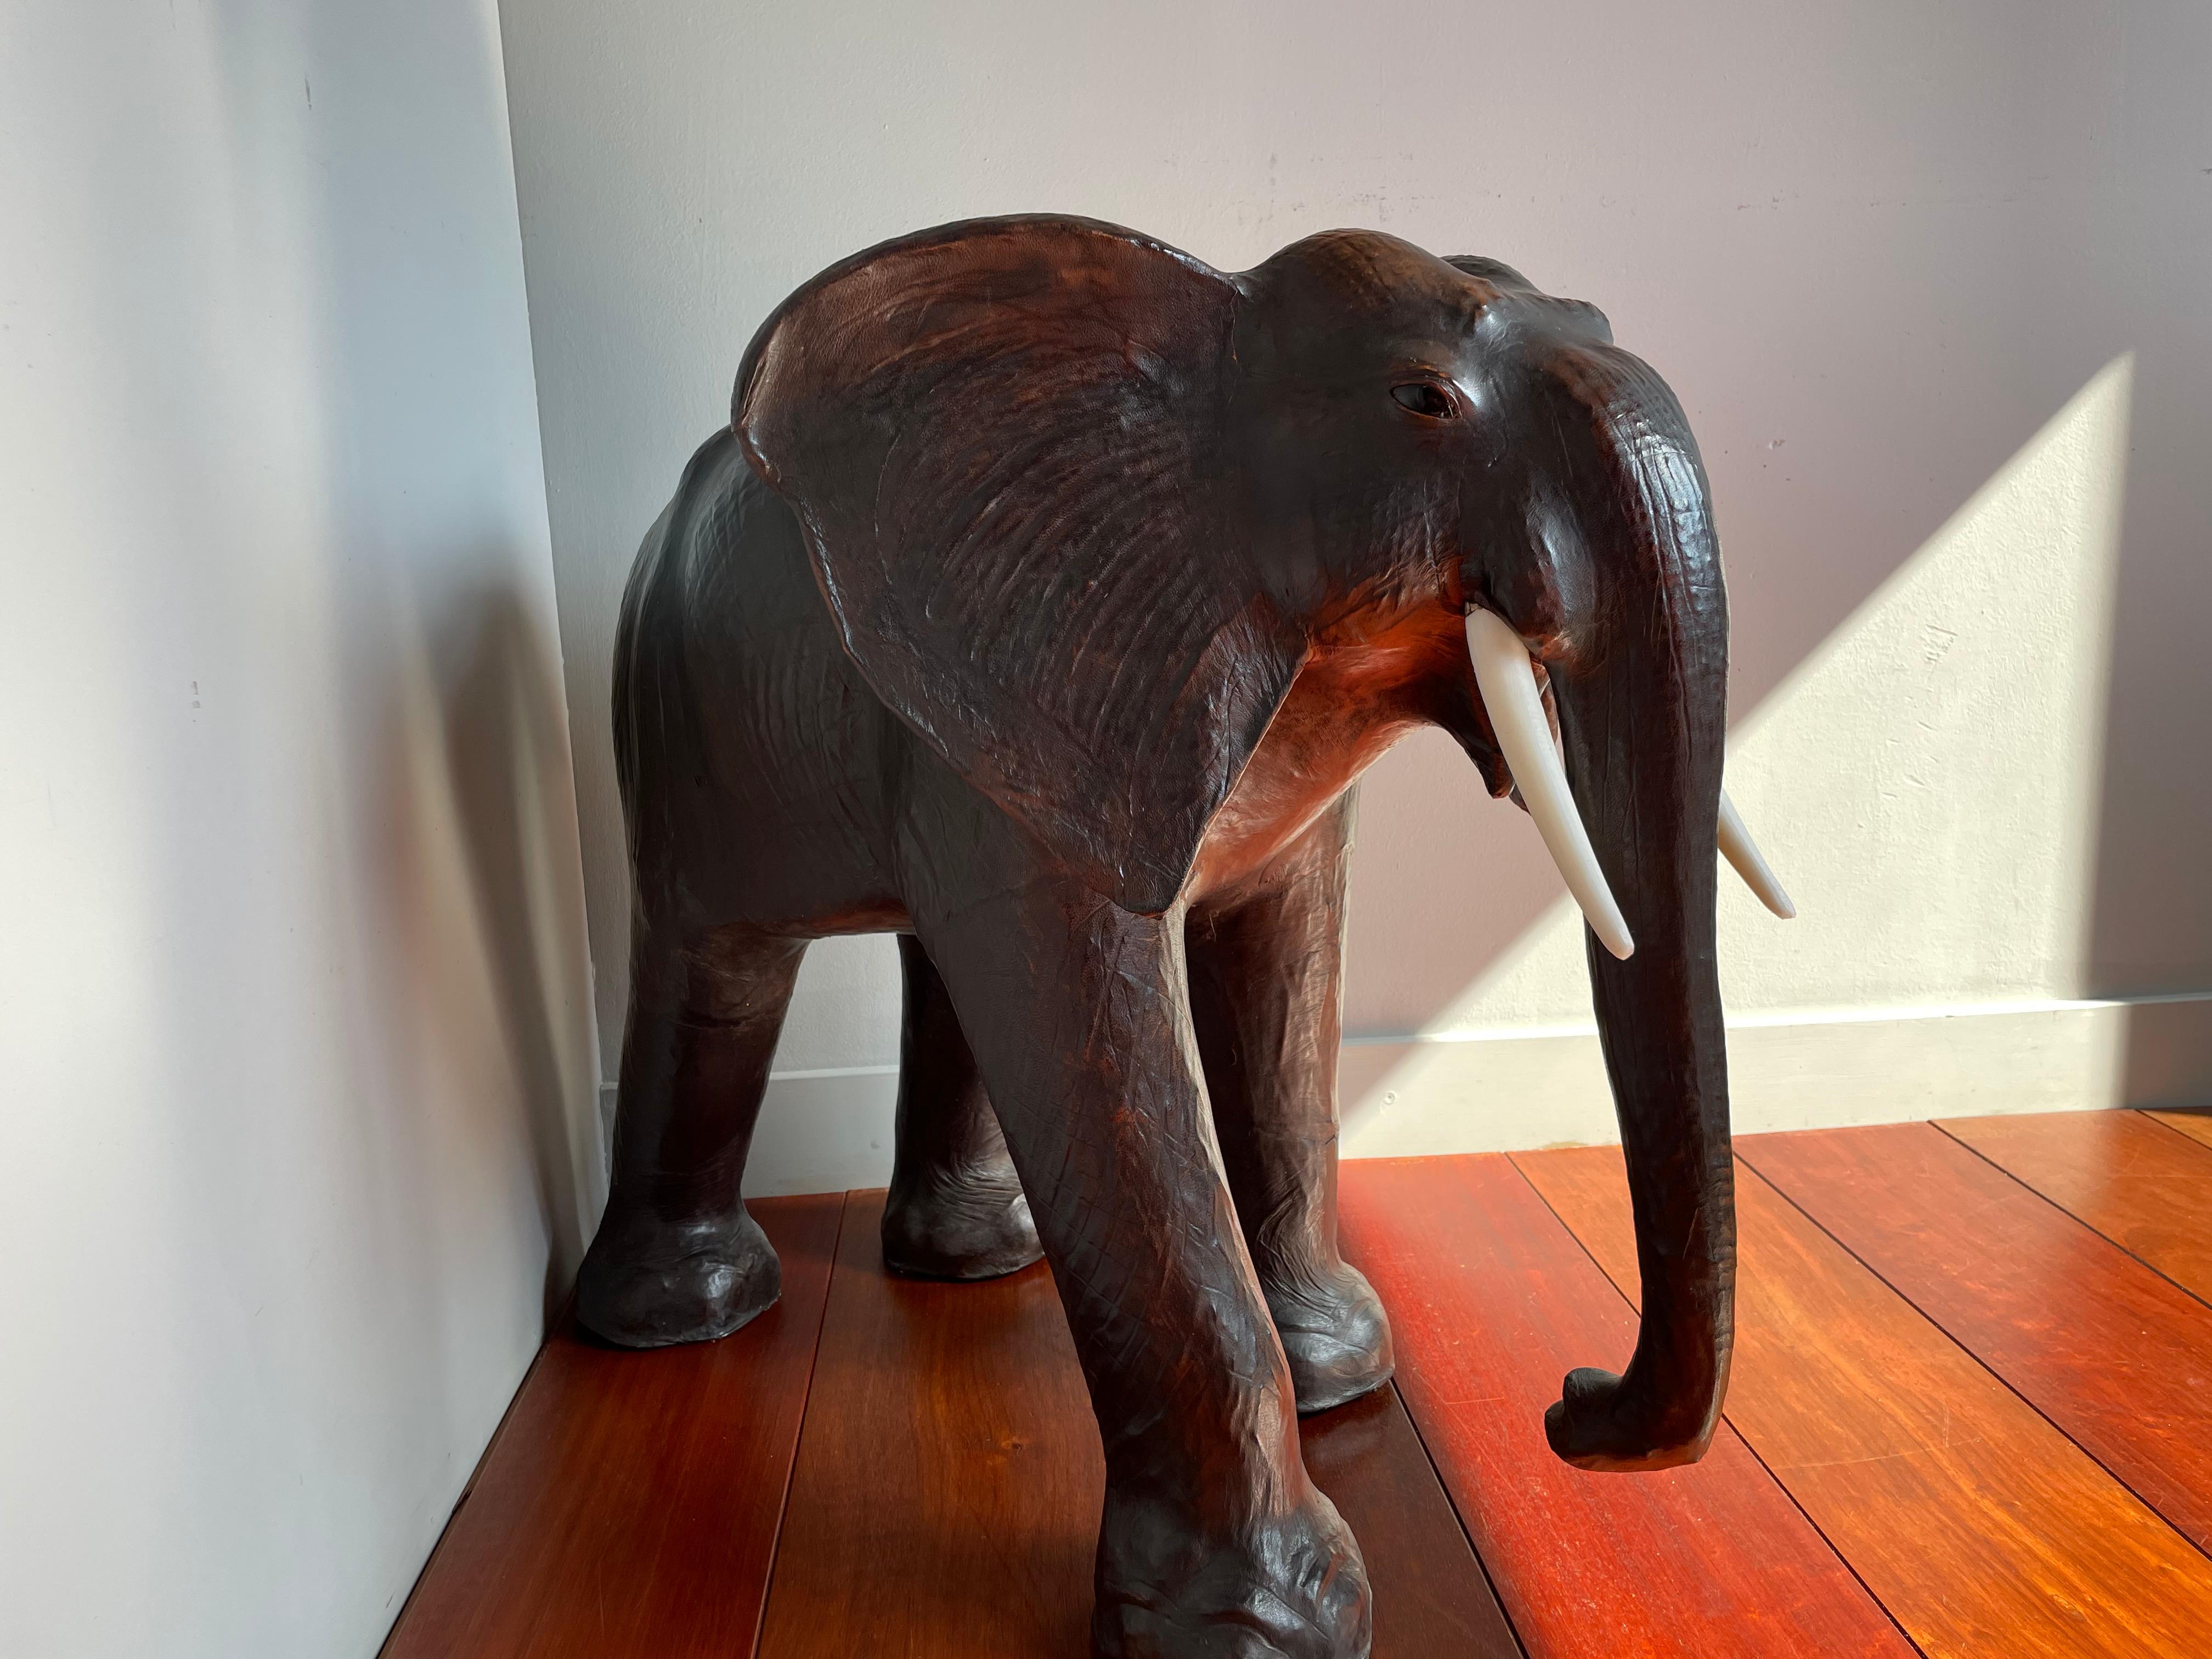 Good size and highly decorative wildlife sculpture.

This full-grown and impressive elephant has both great aesthetic and decorative value. Underneath the leather hide is a well carved wooden sculpture which is why this sizable tusker has such